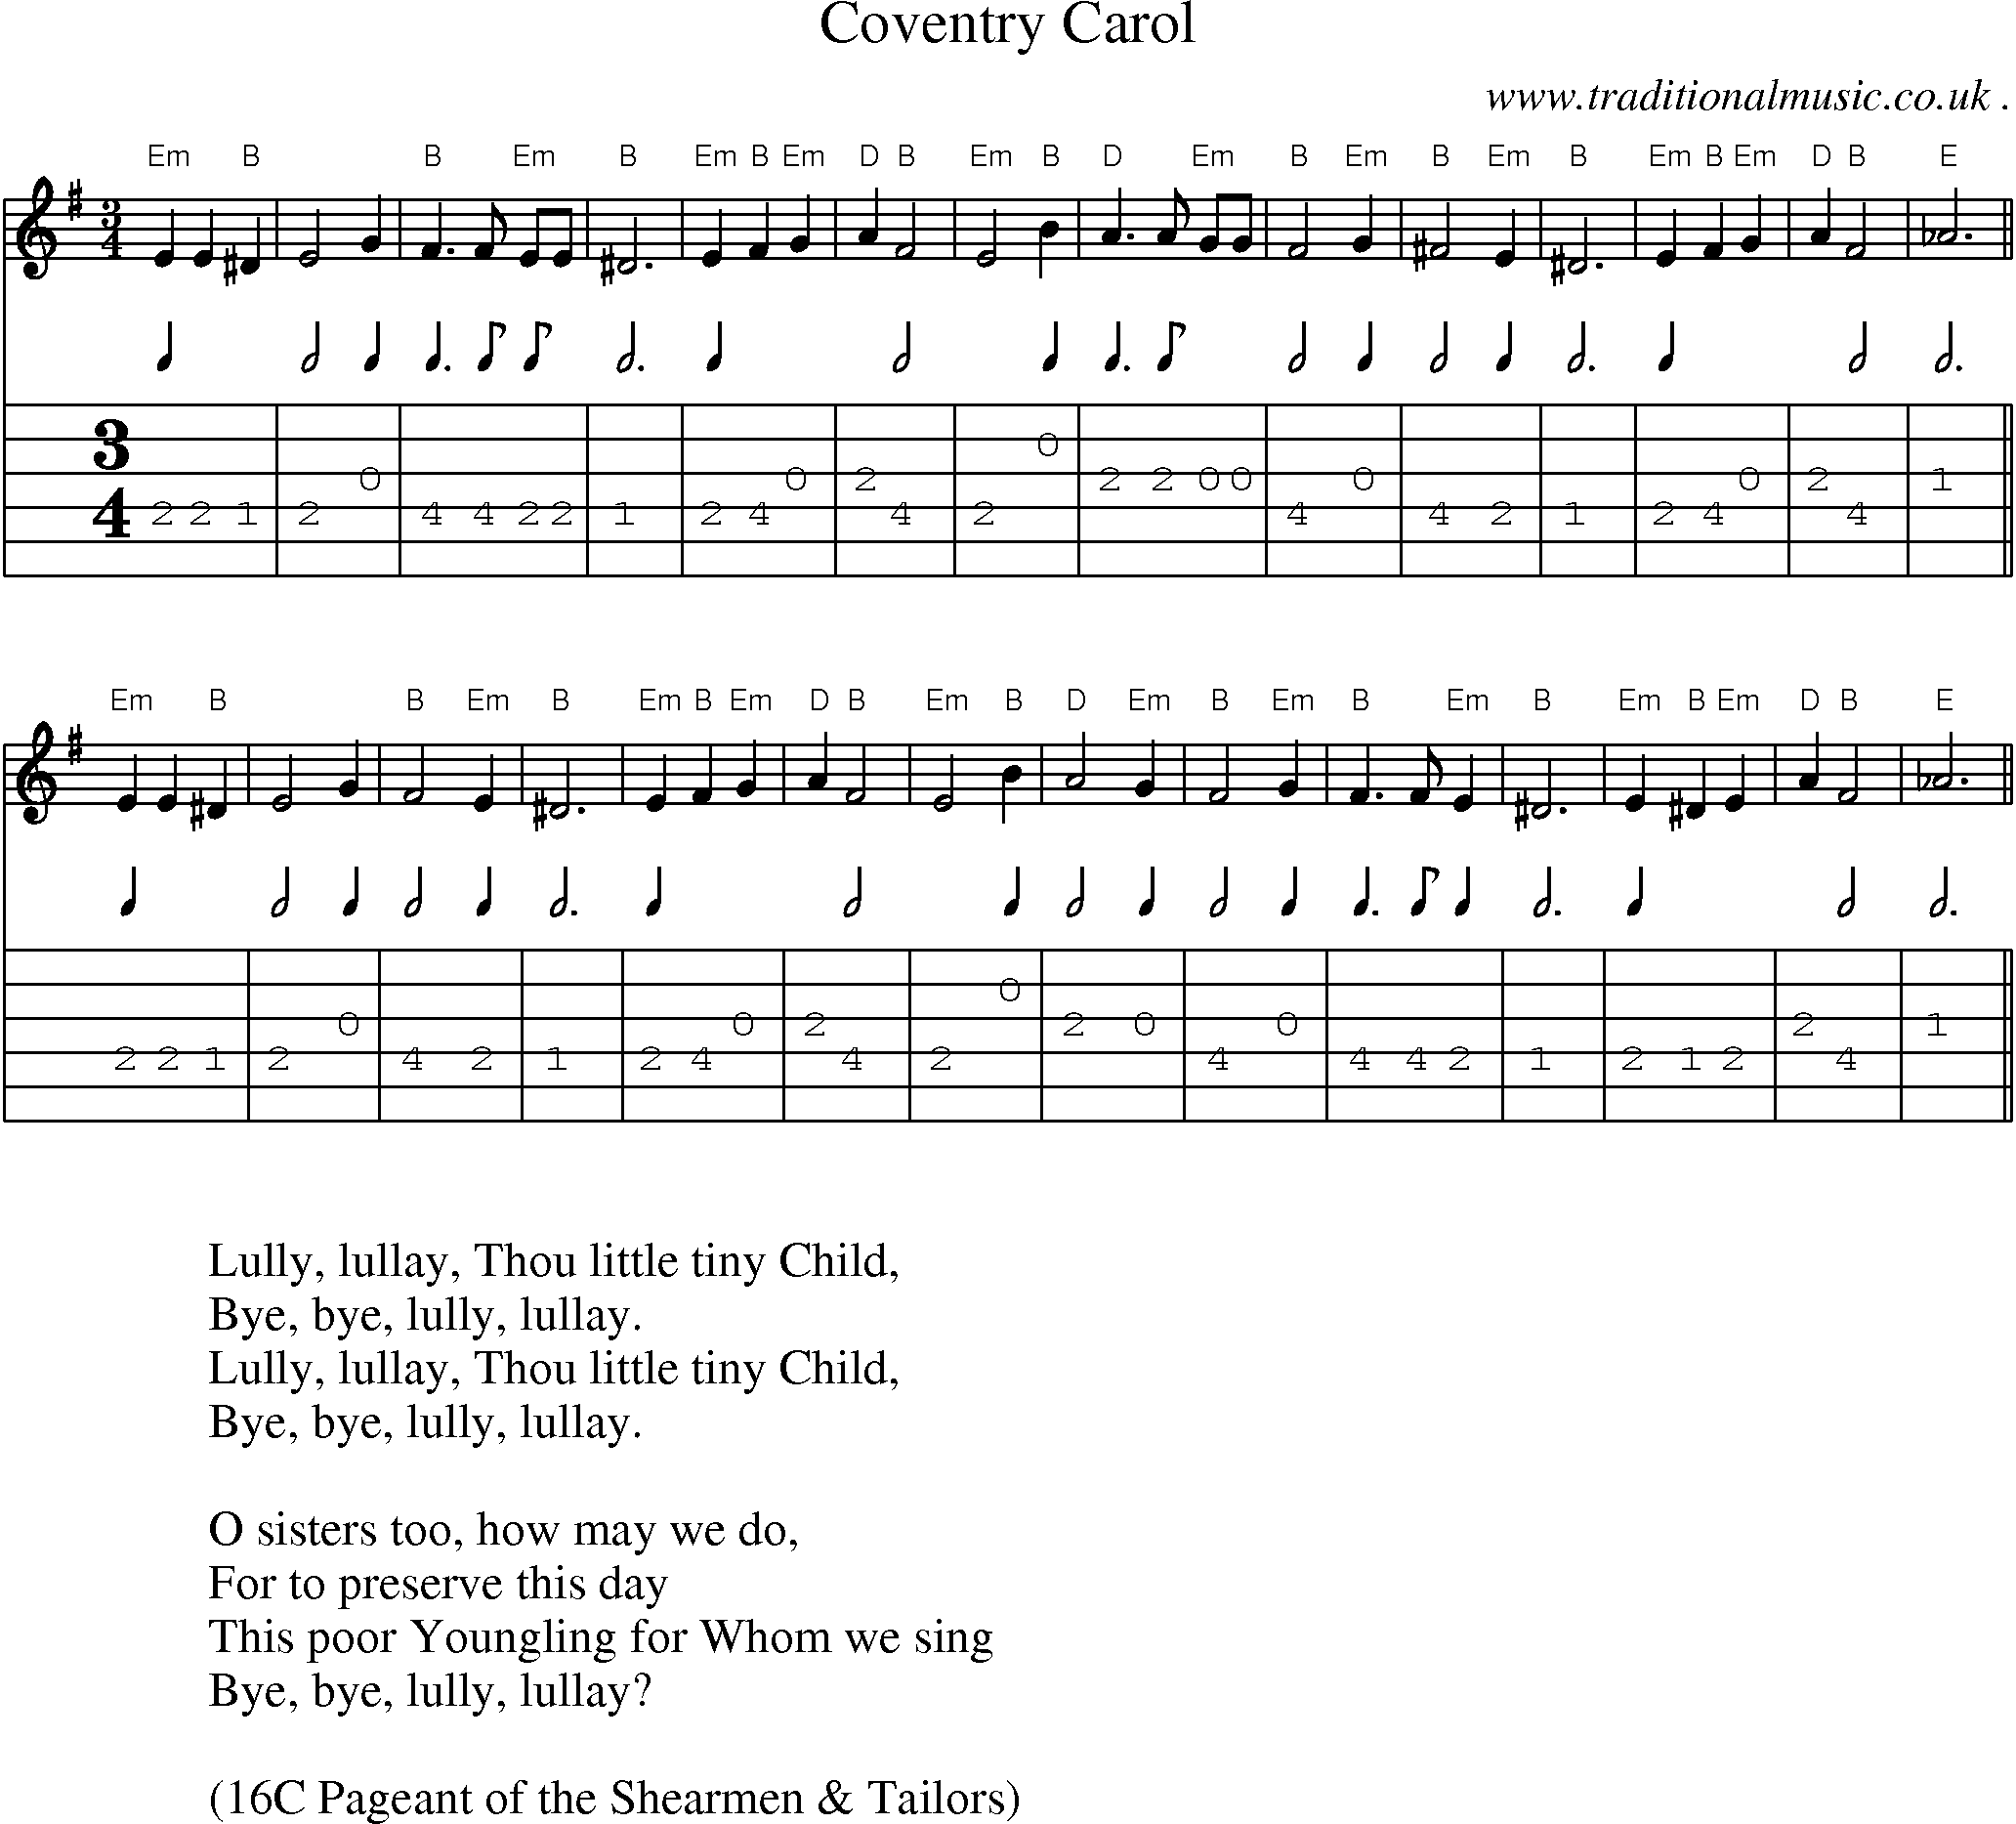 Music Score and Guitar Tabs for Coventry Carol